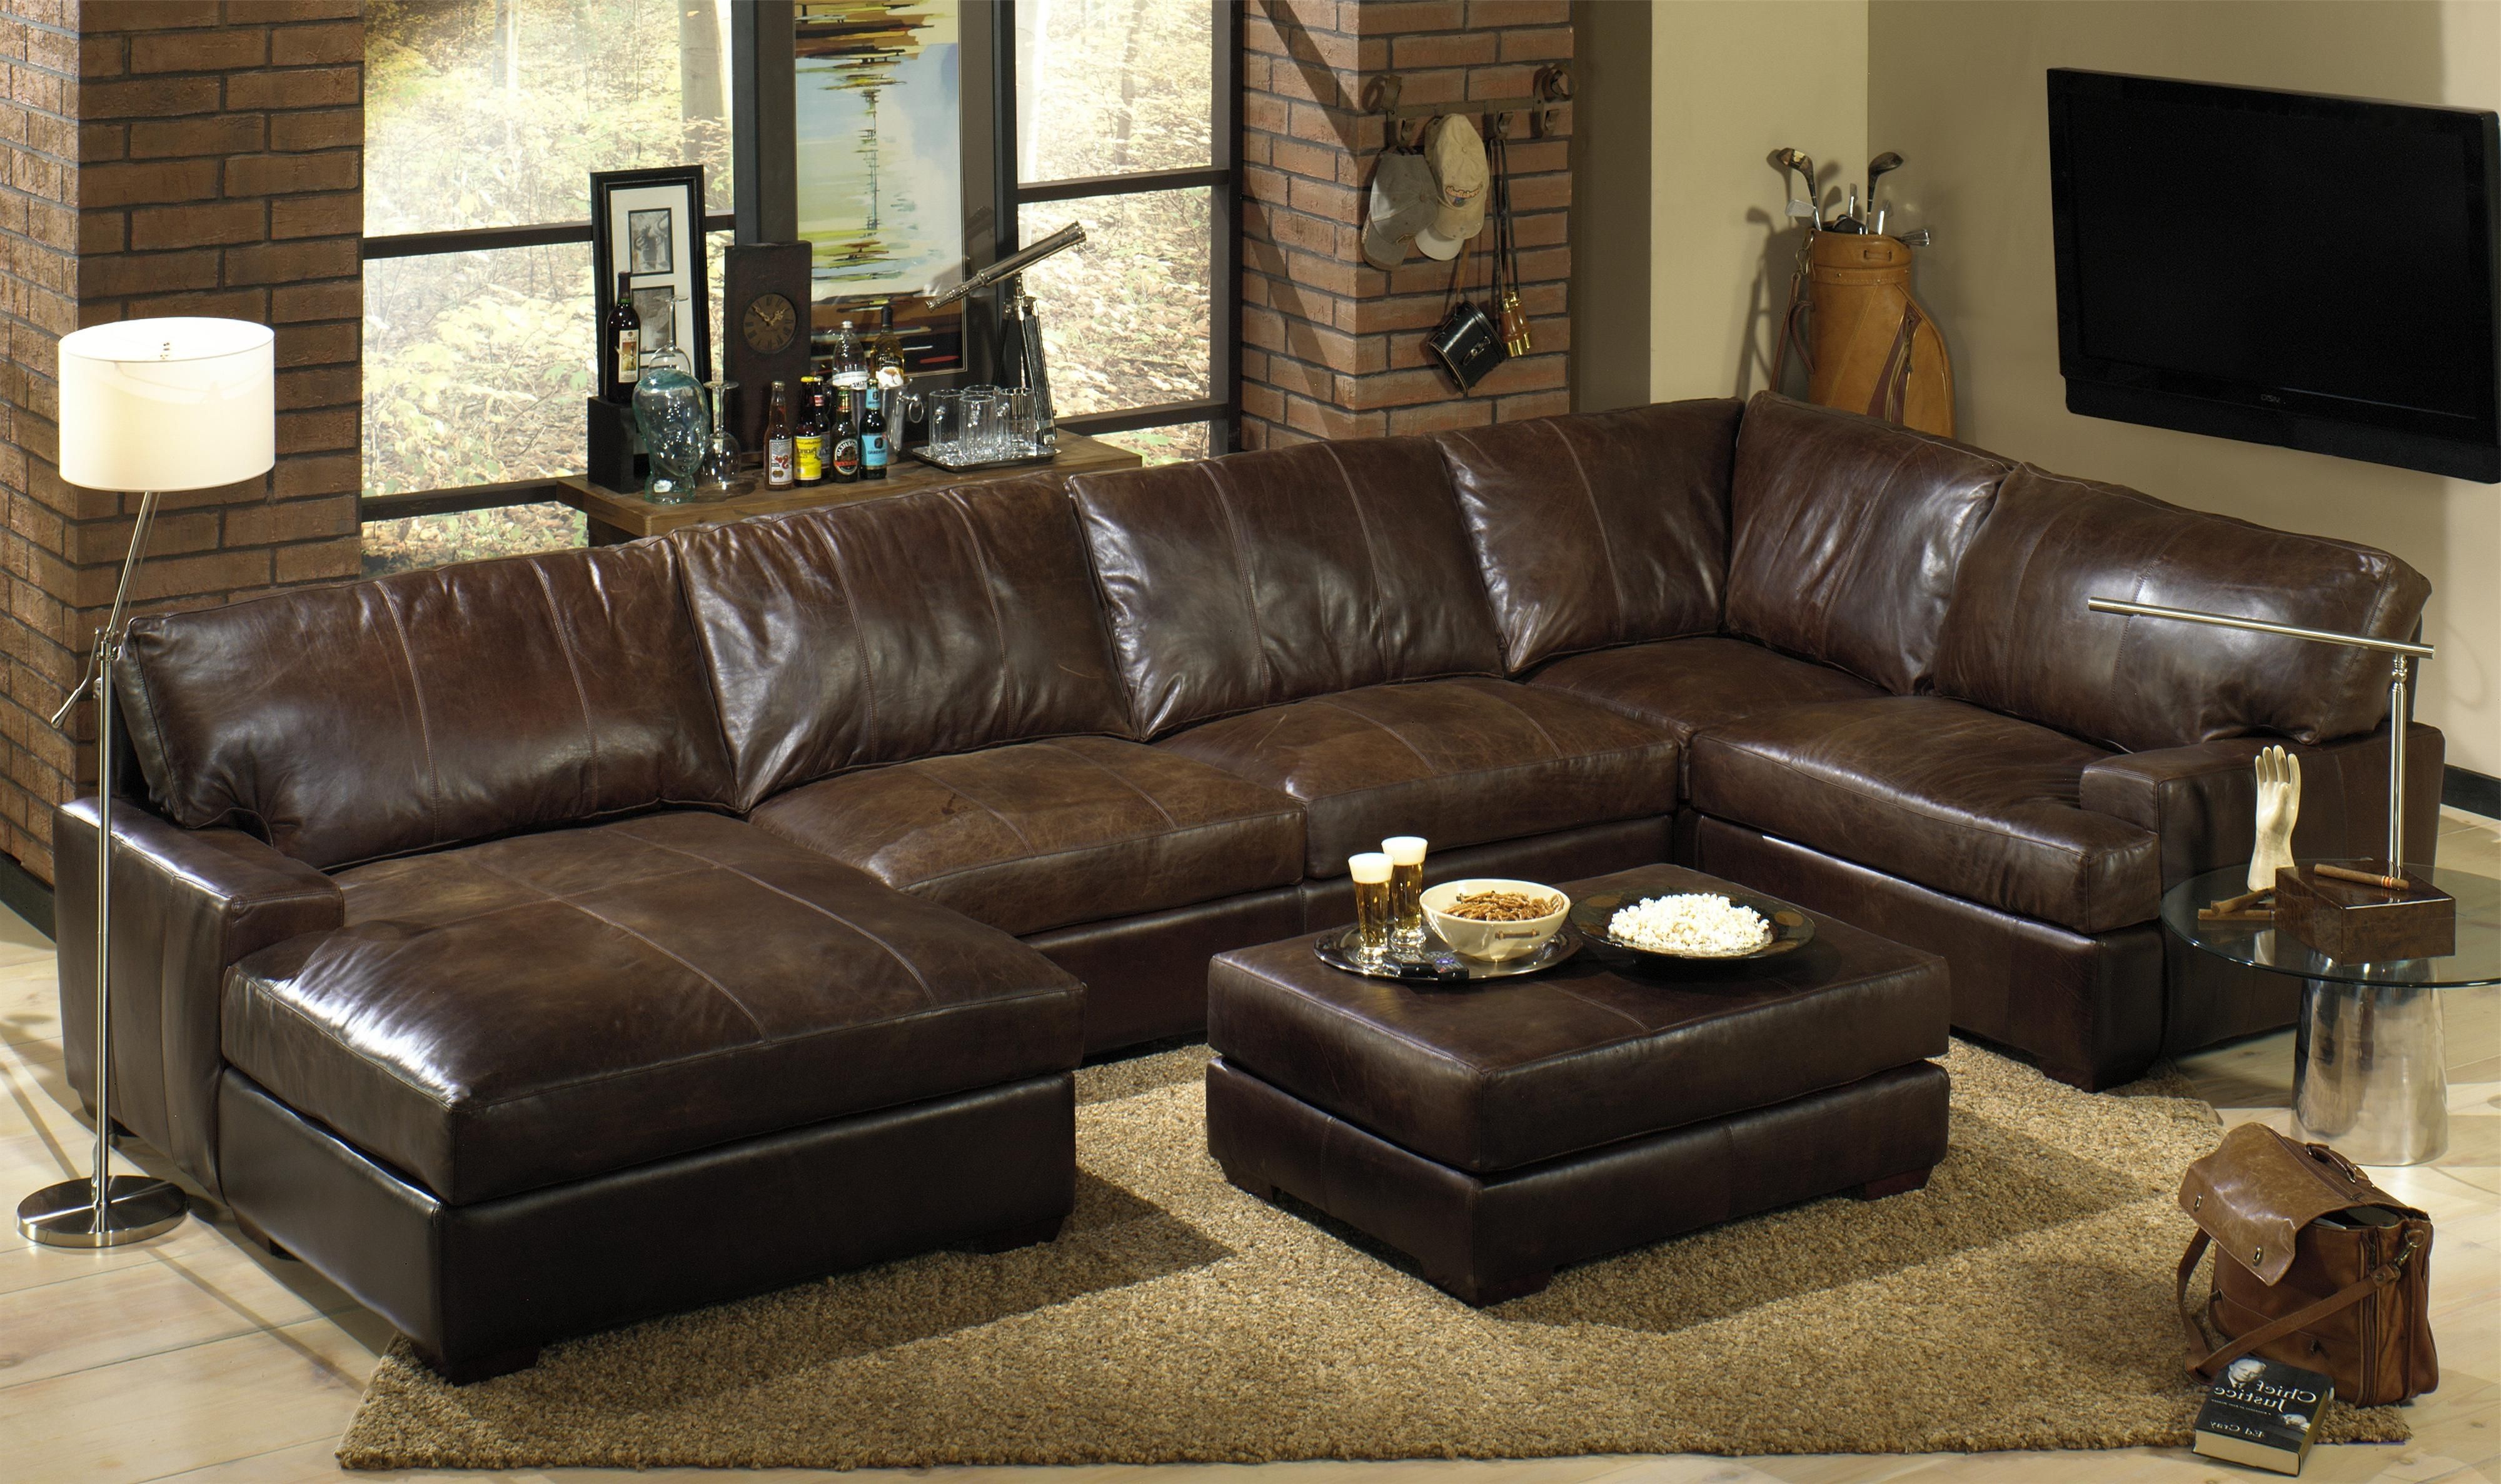 Chaise Lounges : Sofas Oversized S Deep Seat Sectional And Leather Throughout Most Recently Released Leather Lounge Sofas (View 10 of 15)